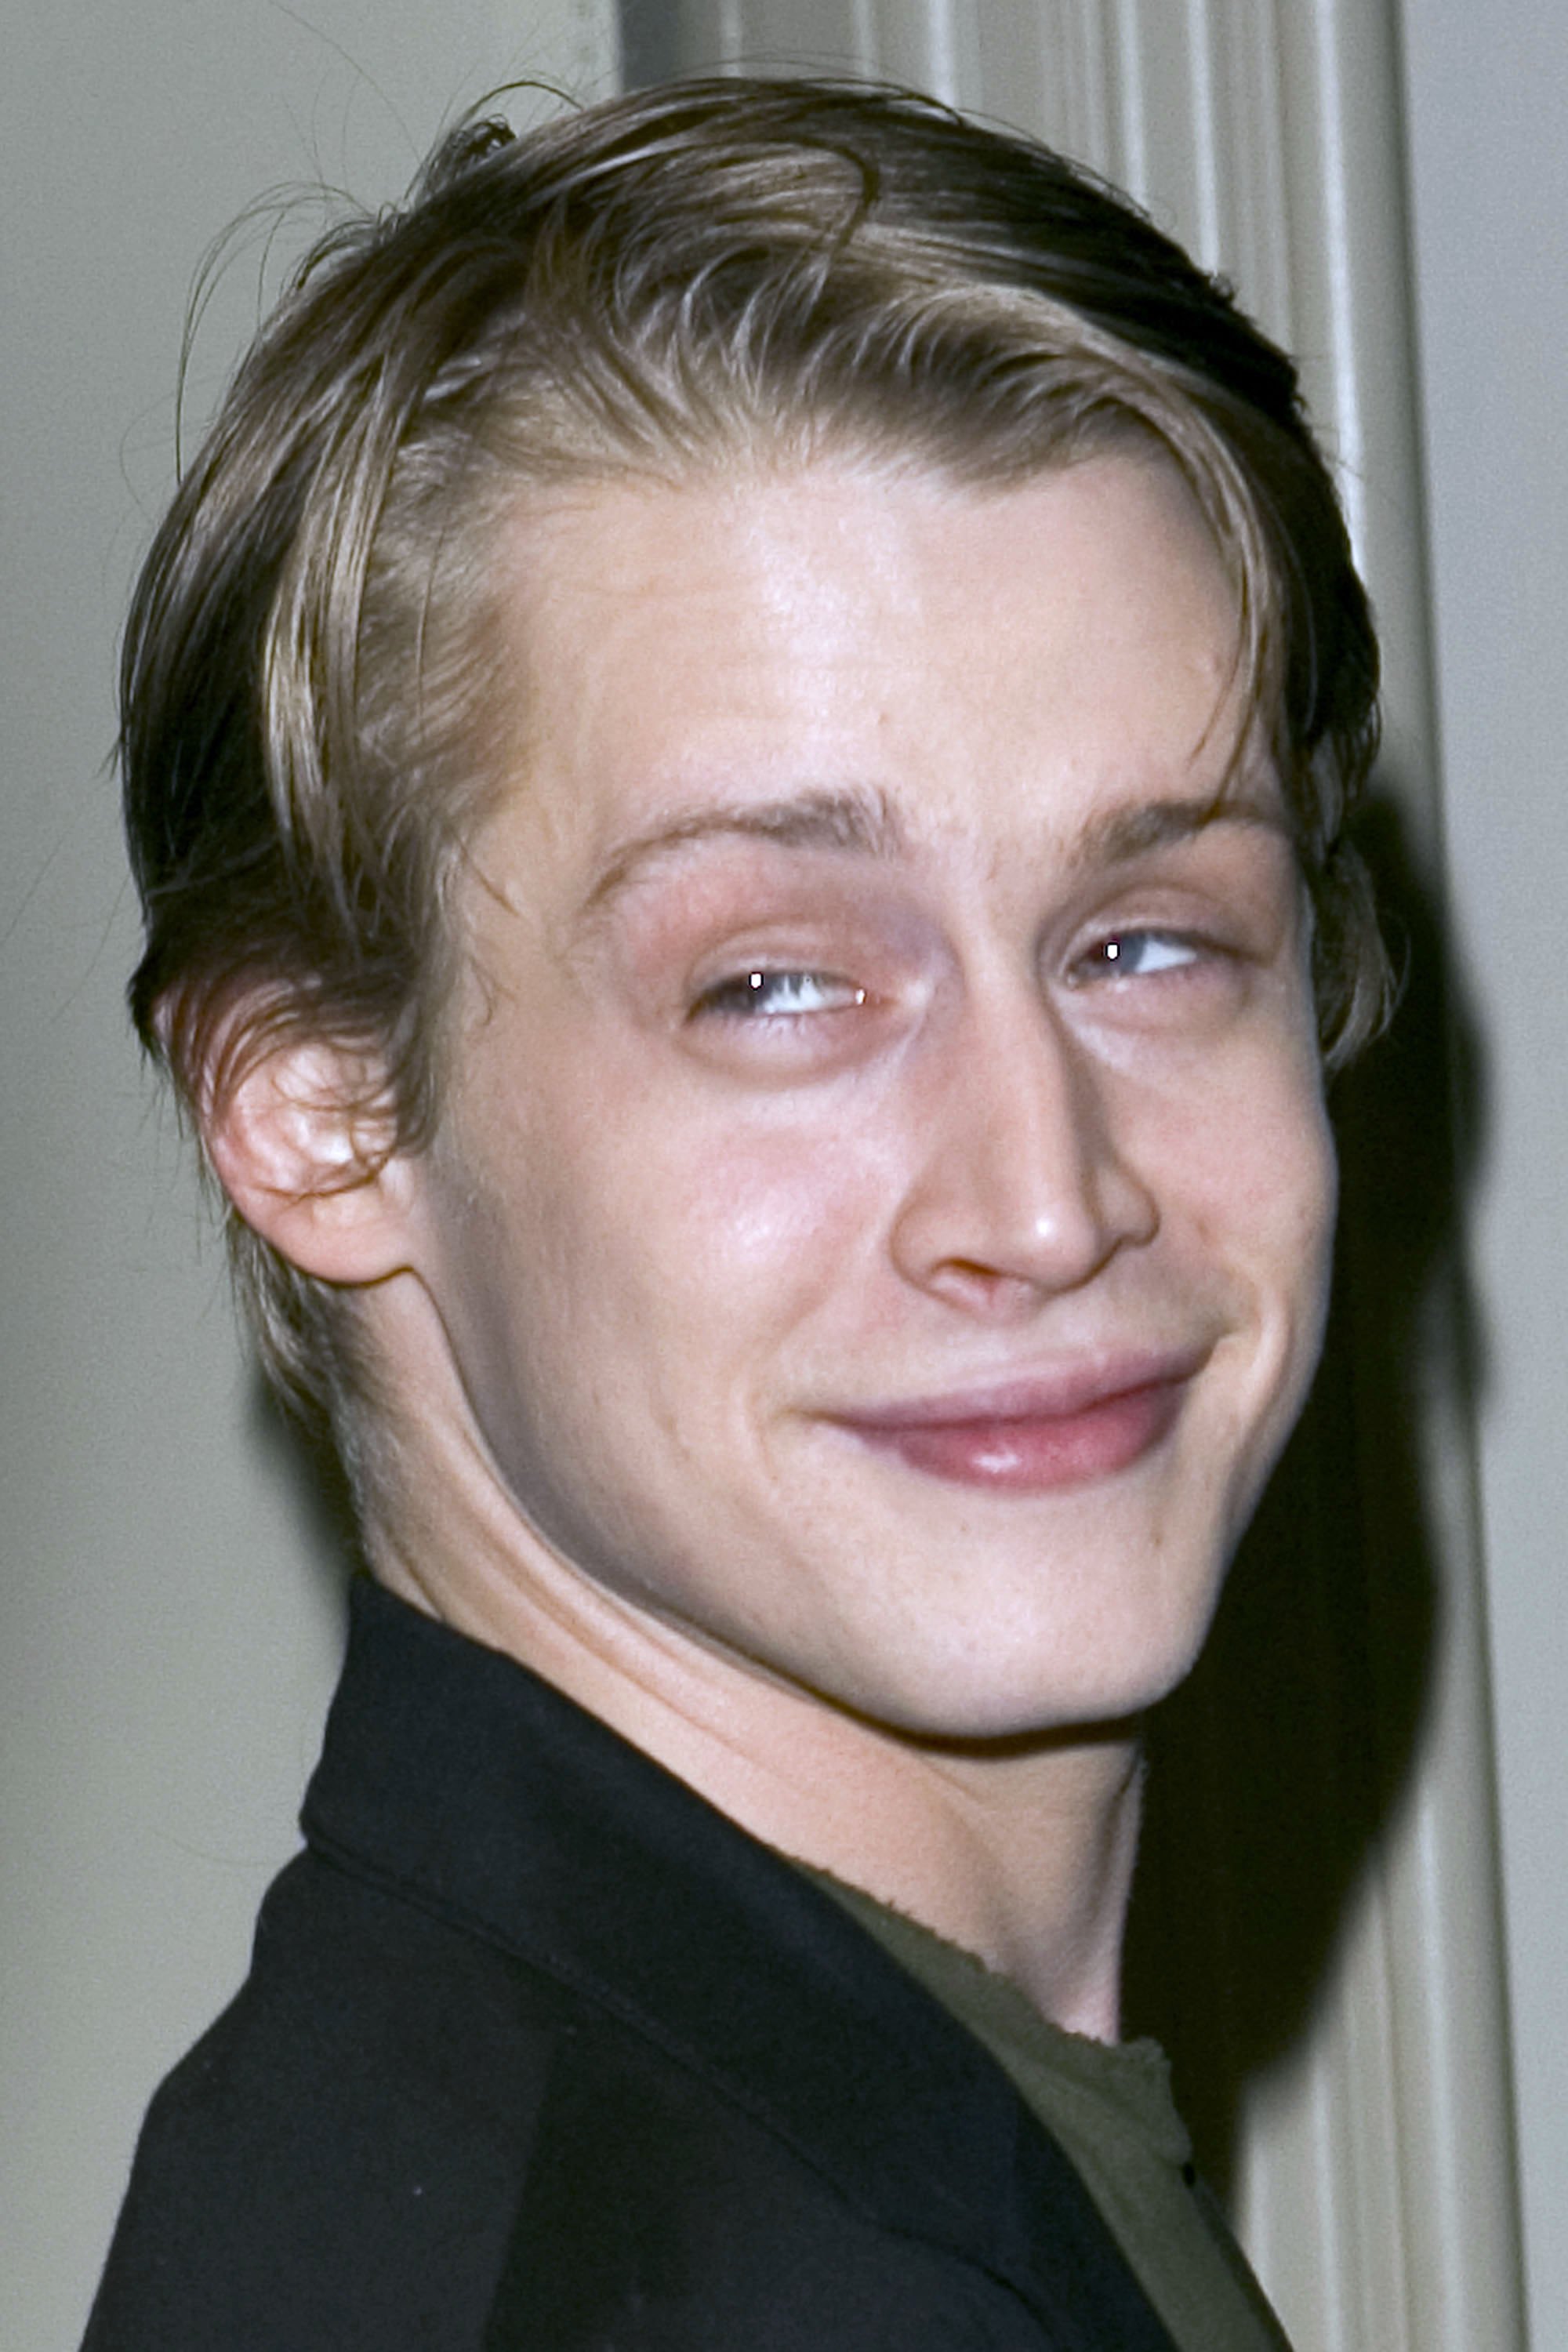 Macaulay Culkin during the signing of his book "Junior" in New York City on March 13, 2006  | Source: Getty Images